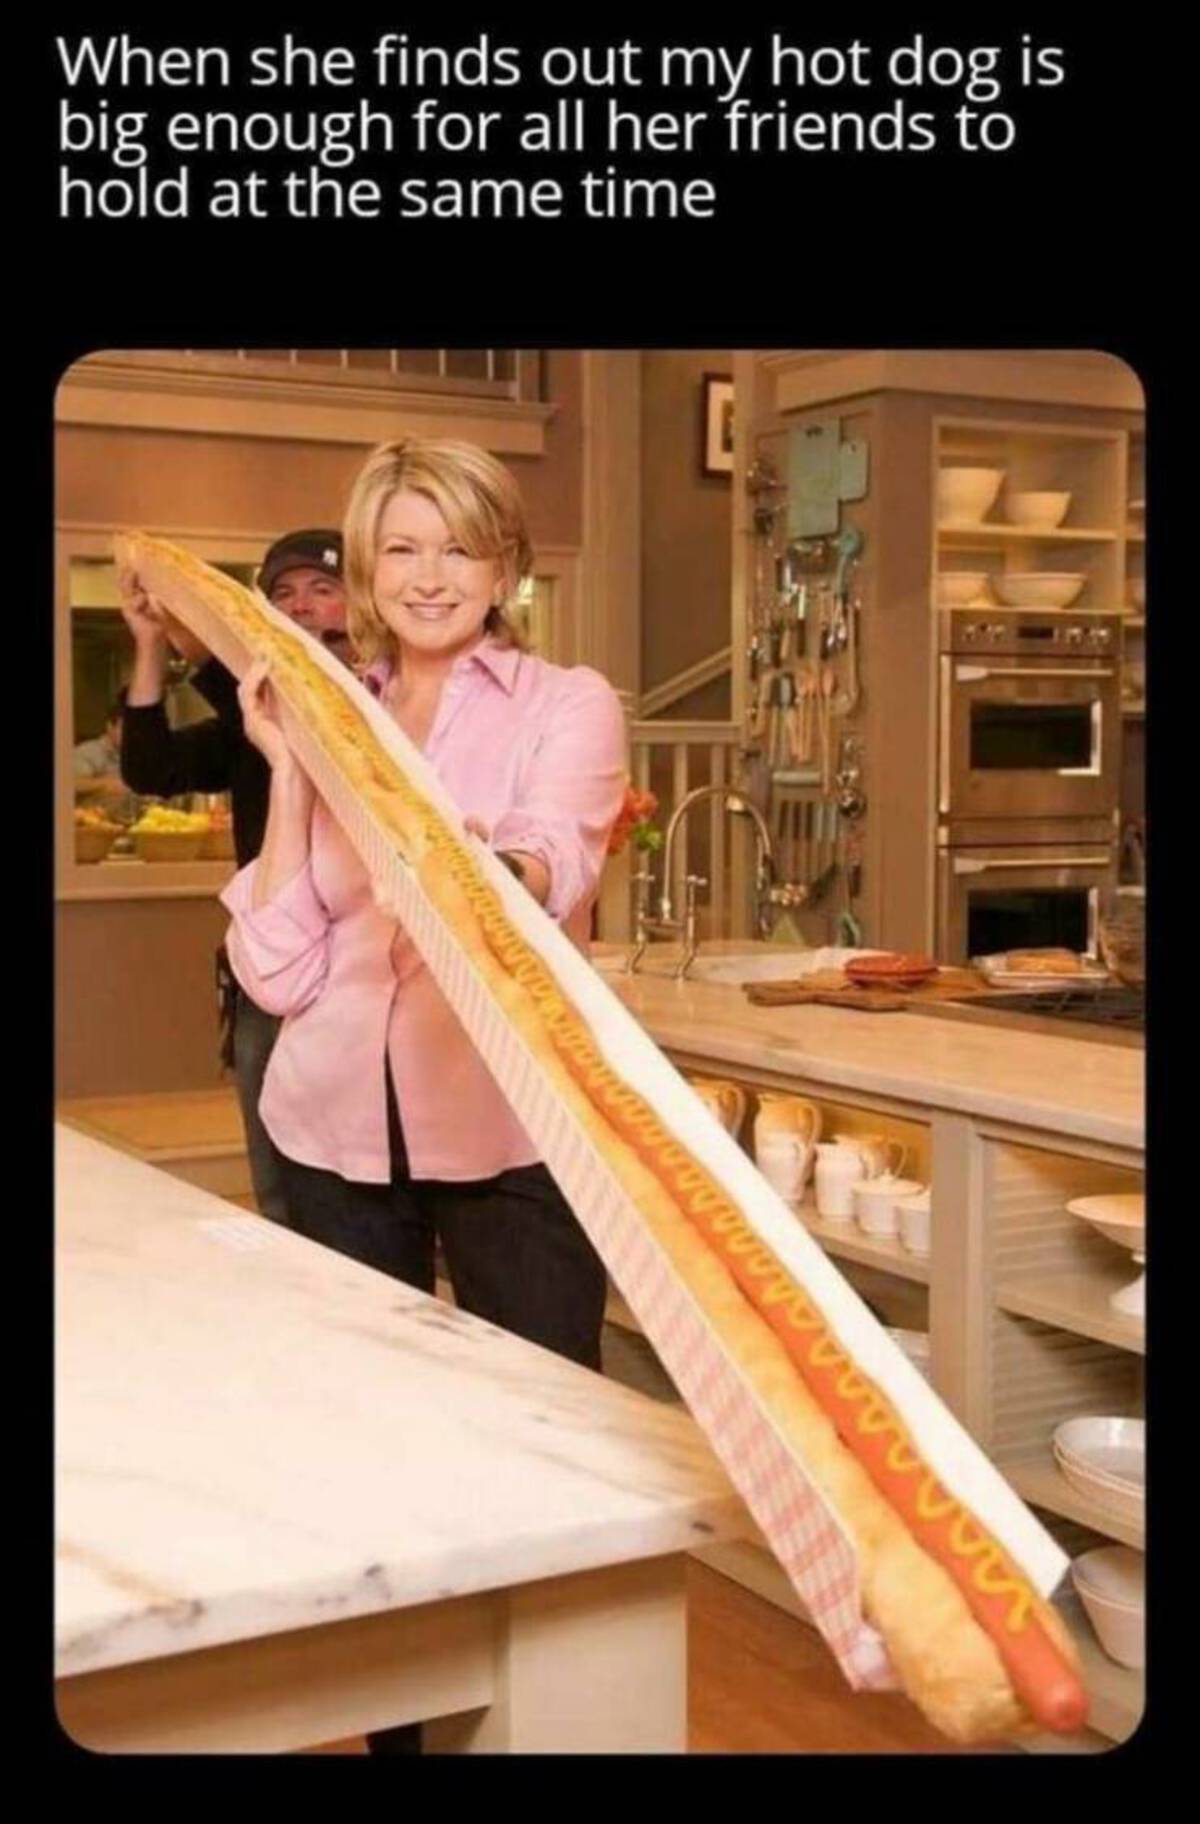 martha stewart hot dog - When she finds out my hot dog is big enough for all her friends to hold at the same time